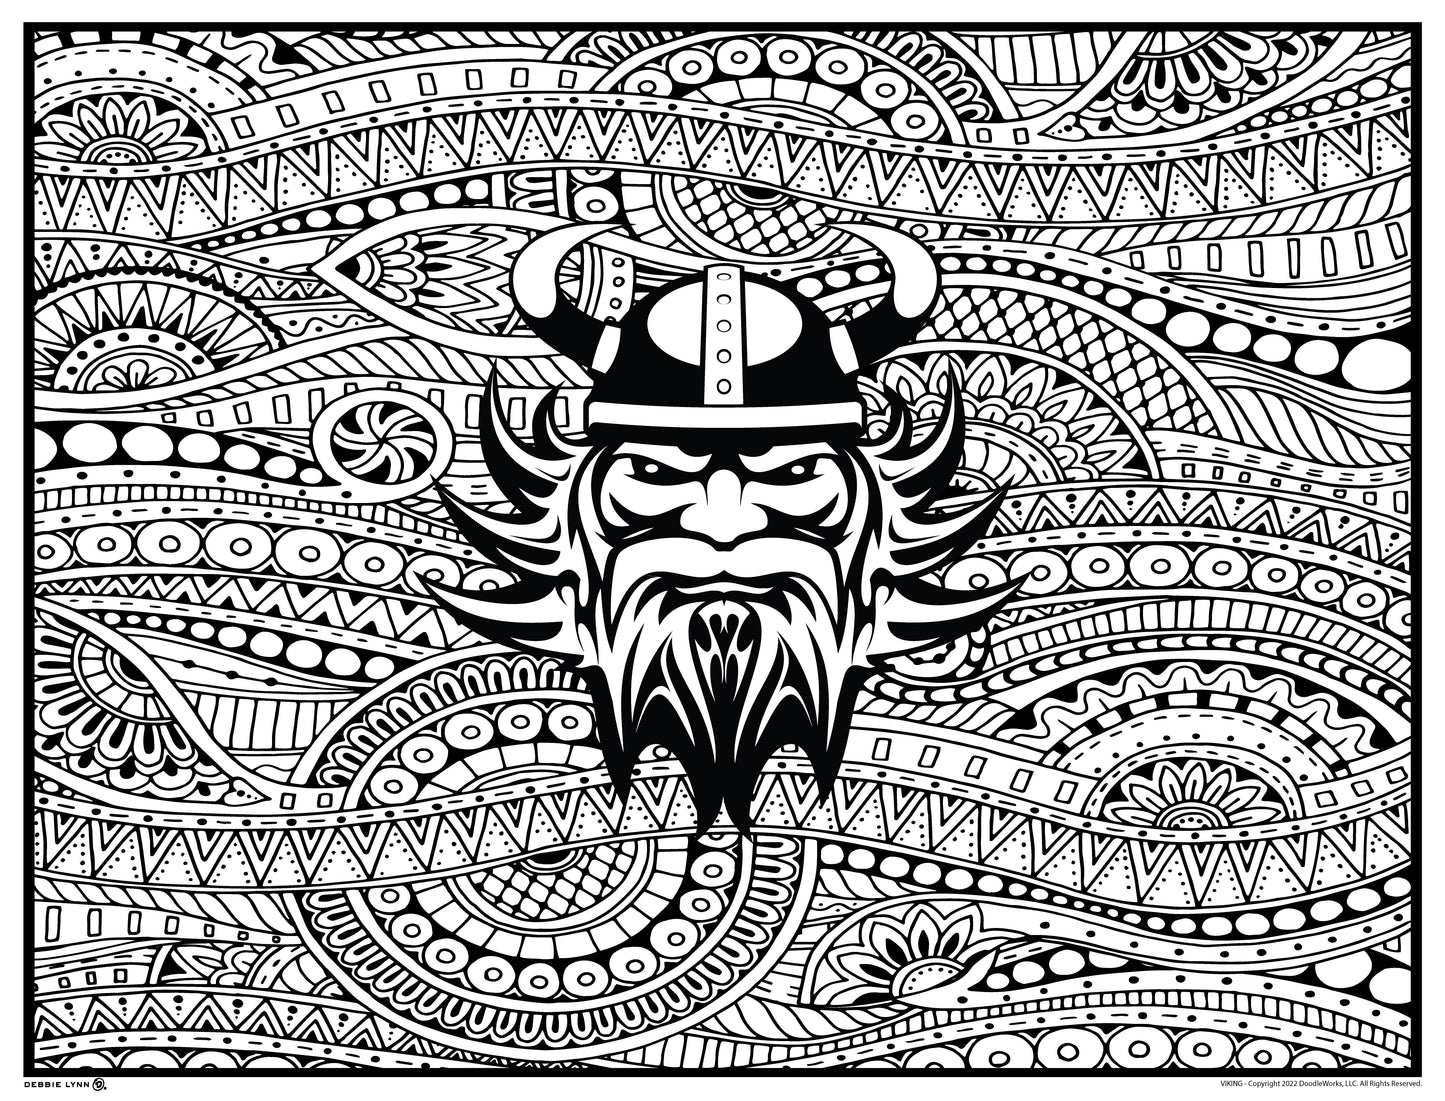 Viking Personalized Giant Coloring Poster 46"x60"